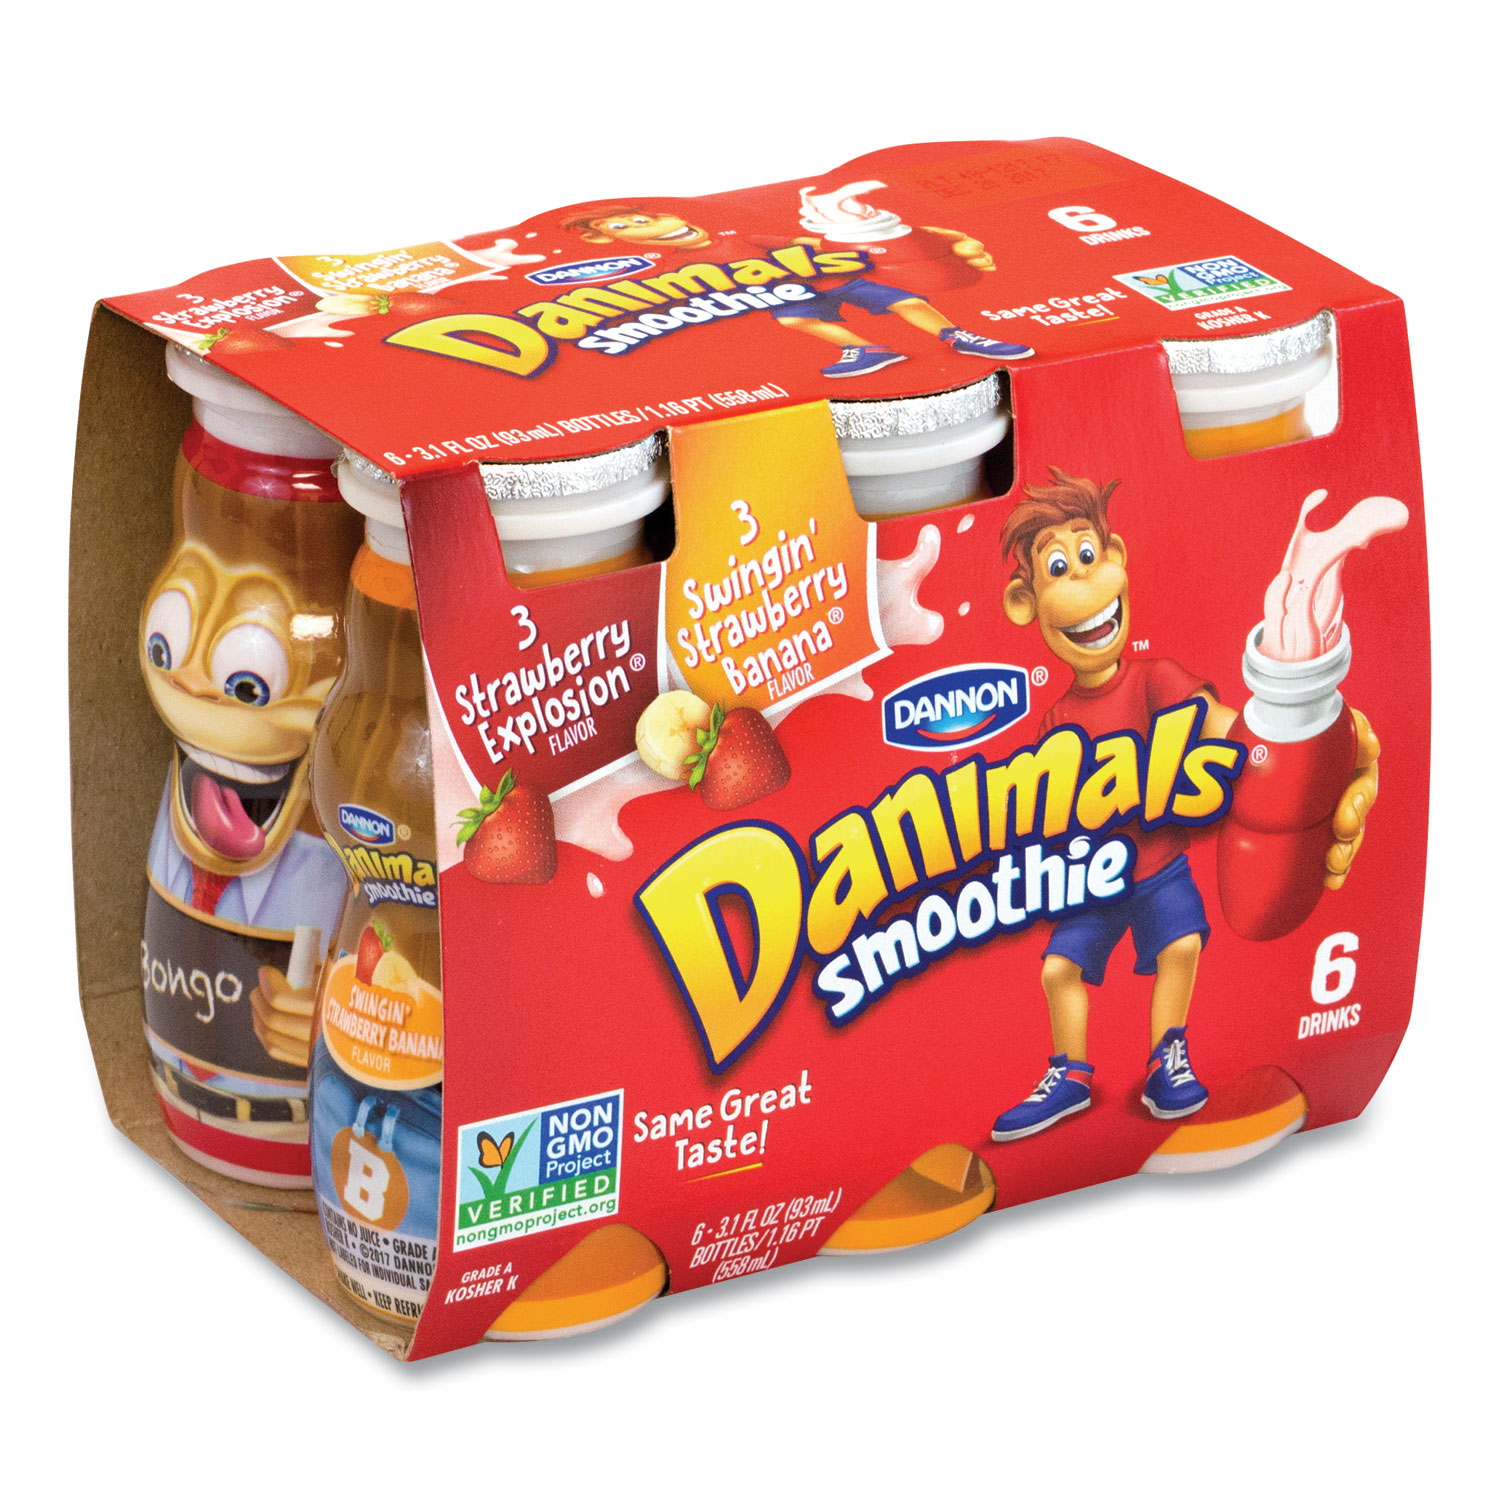 DANNON® Danimals Smoothies, Assorted Flavors, 3.1 oz Bottle, 6/Box, 6 Boxes/Carton, Free Delivery in 1-4 Business Days